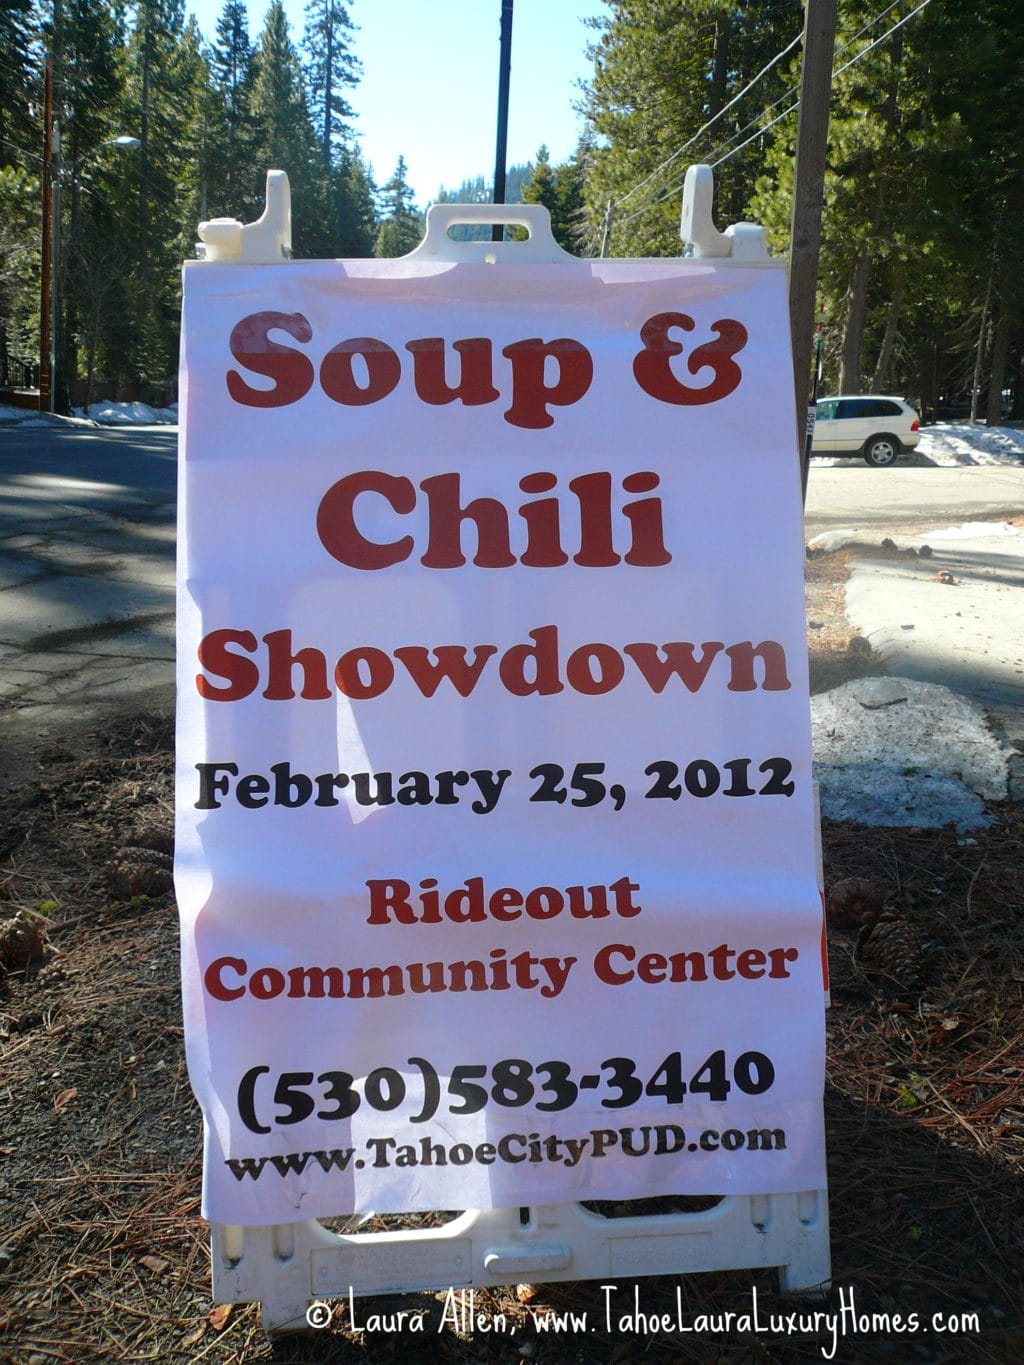 3rd Annual Soup and Chili Cook Off at the Rideout Community Center, Tahoe City, California, Saturday, February 25, 2012